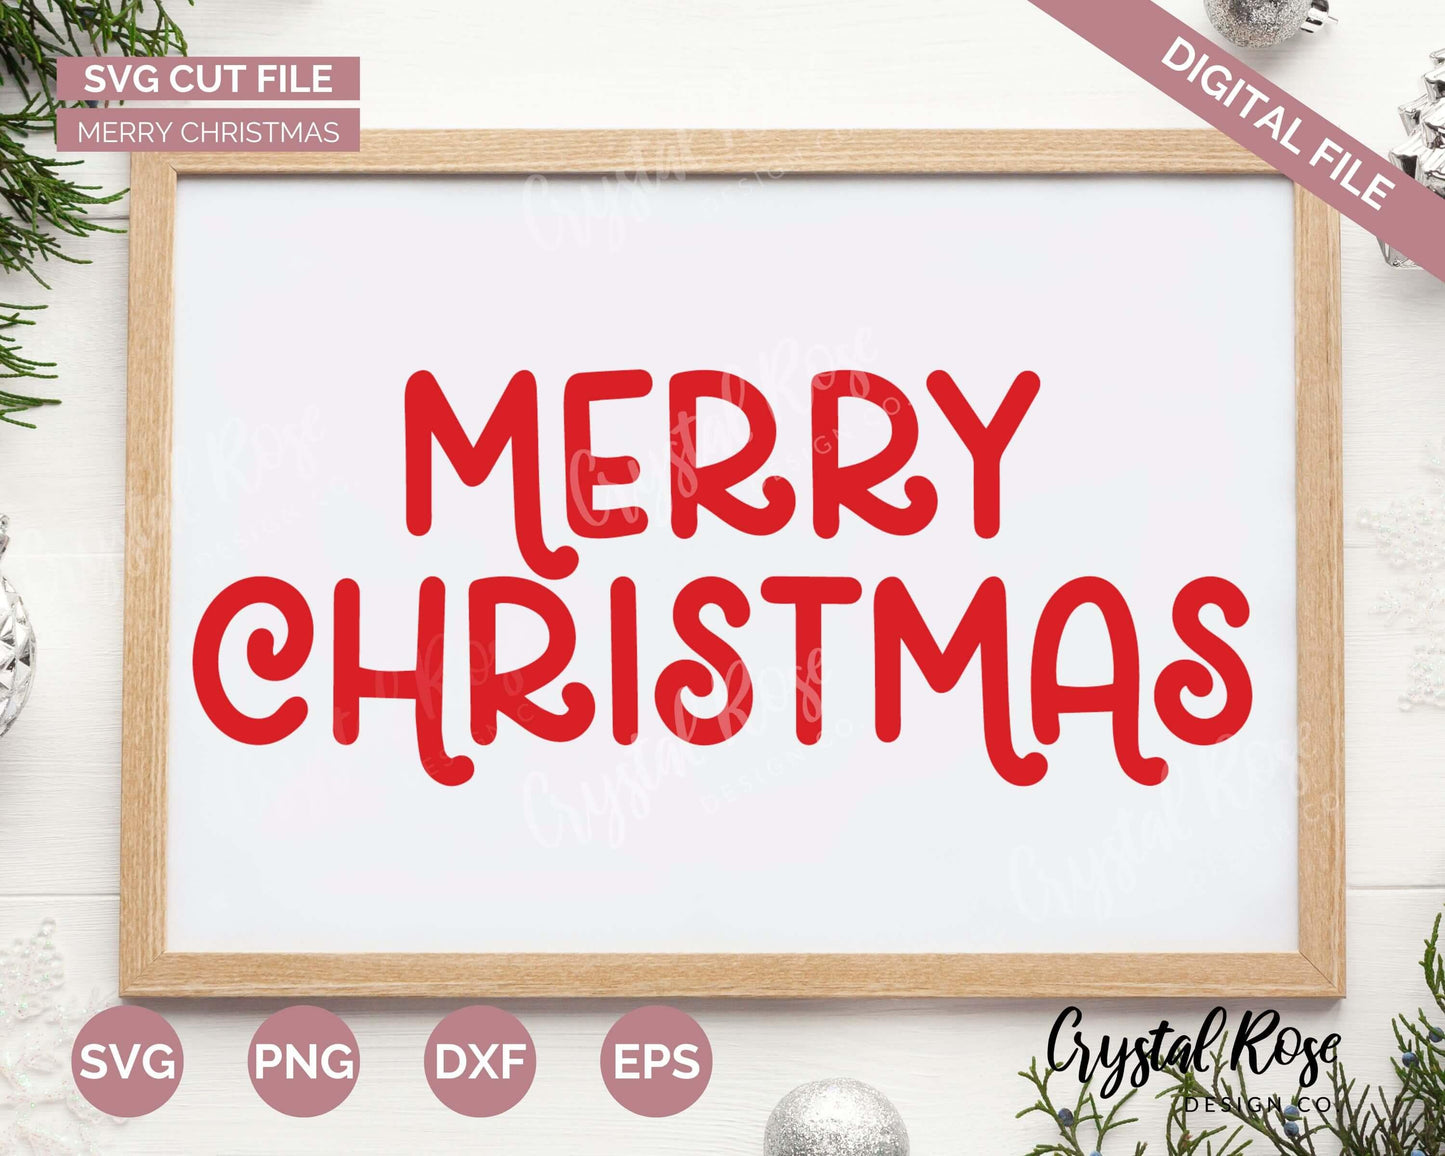 Merry Christmas SVG, Christmas SVG, Digital Download, Cricut, Silhouette, Glowforge (includes svg/png/dxf/eps)